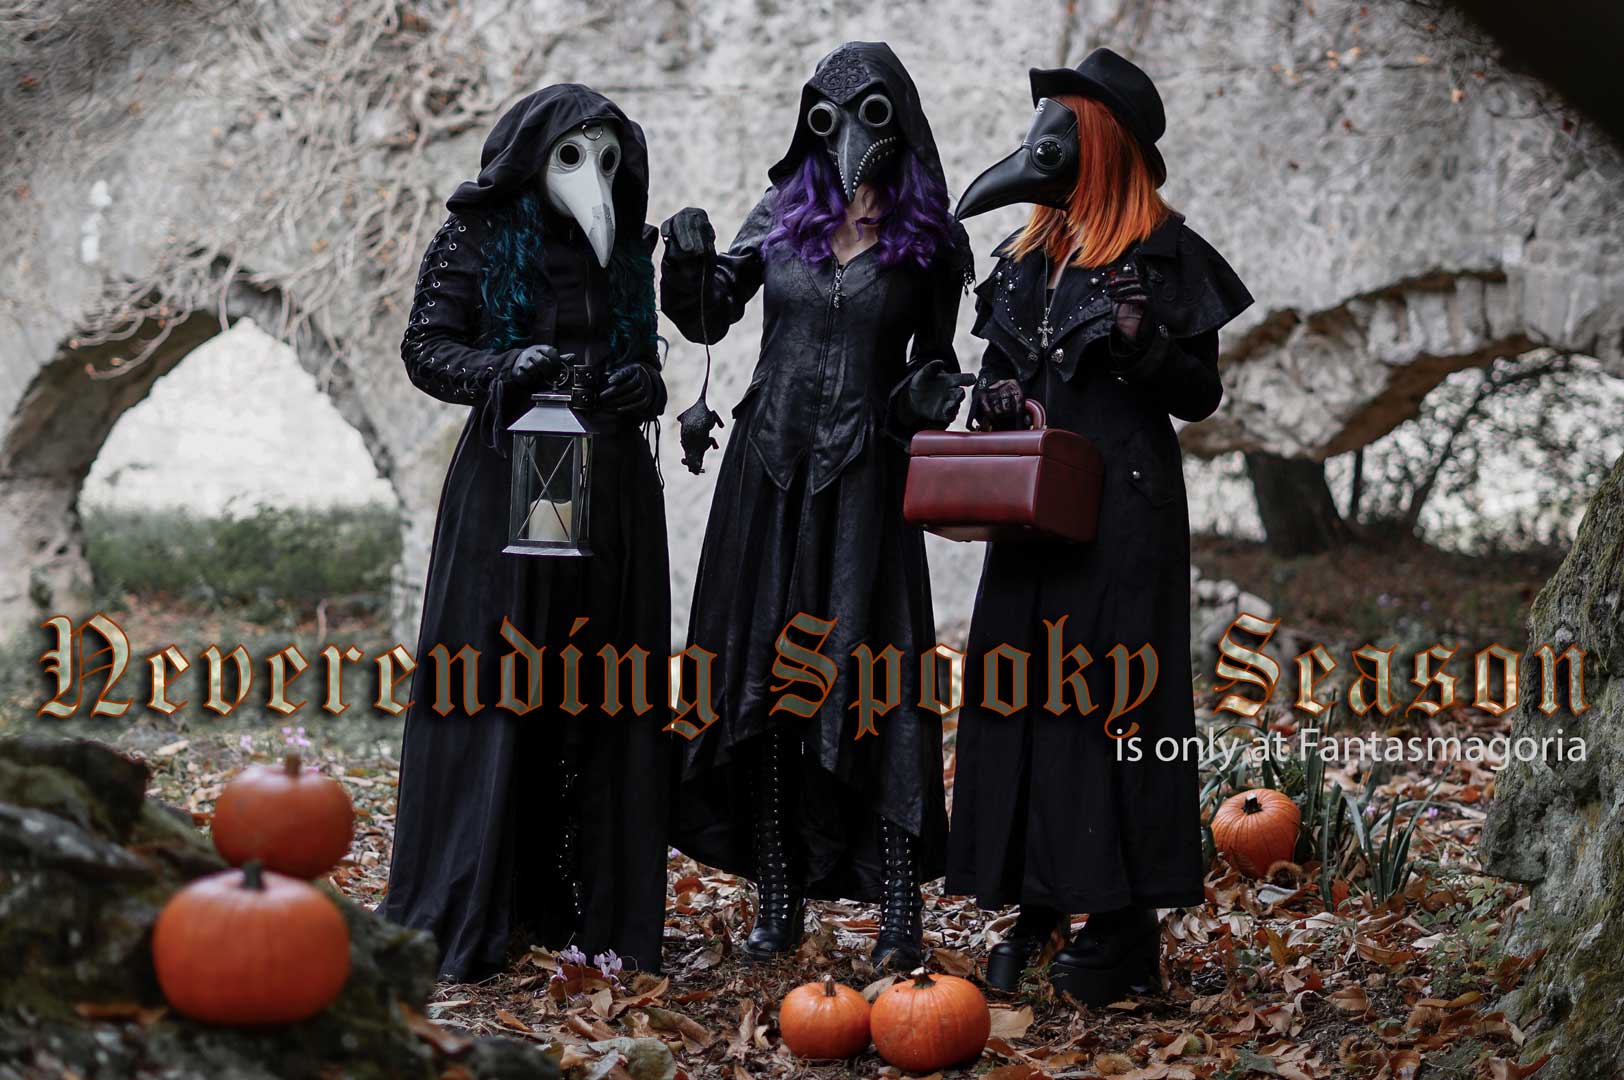 Three Ladies in the Plague Doctor Masks and Gothic Coats from Fantasmagoria shop